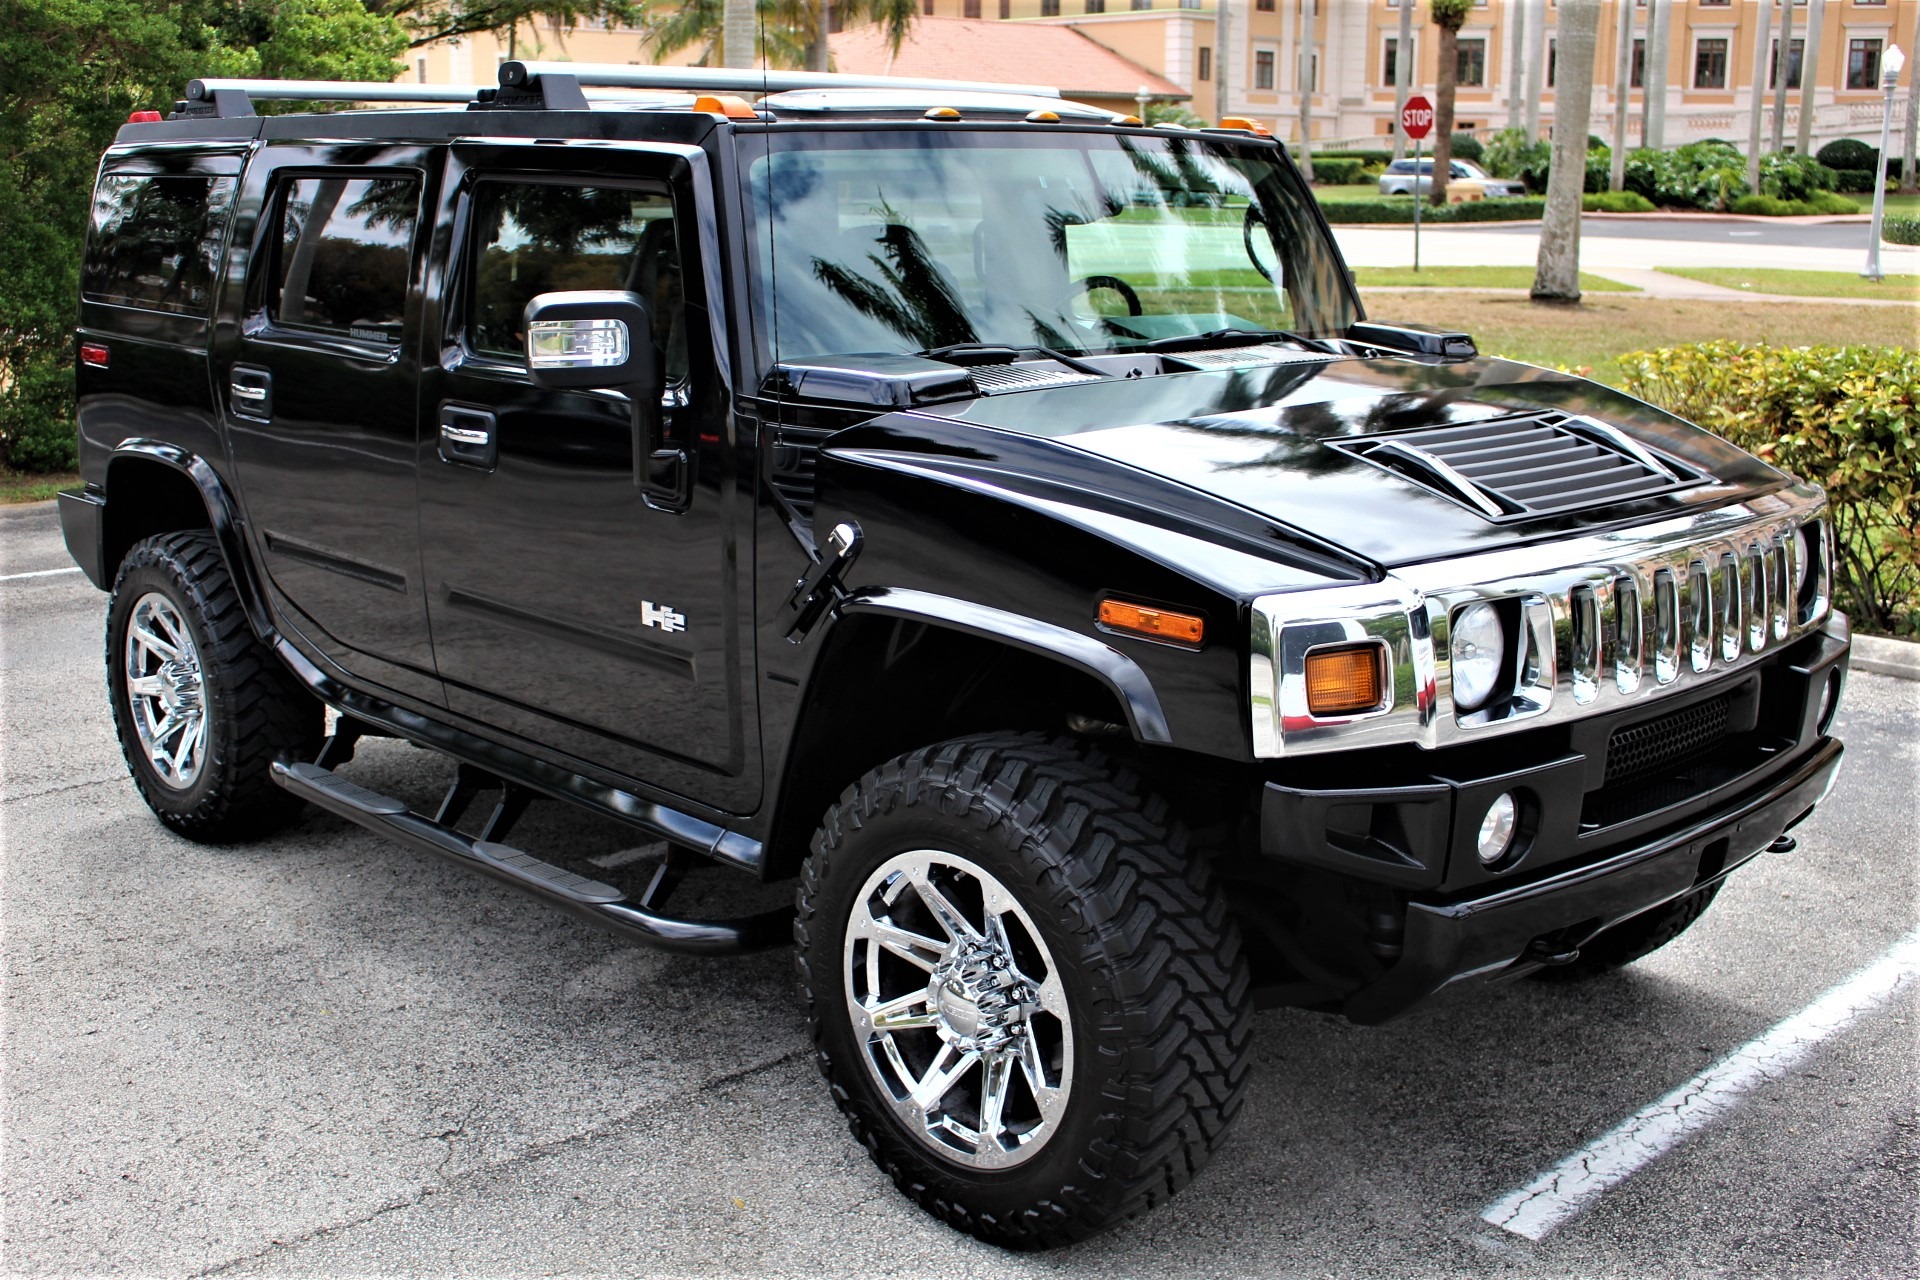 Used 2007 HUMMER H2 for sale Sold at The Gables Sports Cars in Miami FL 33146 3